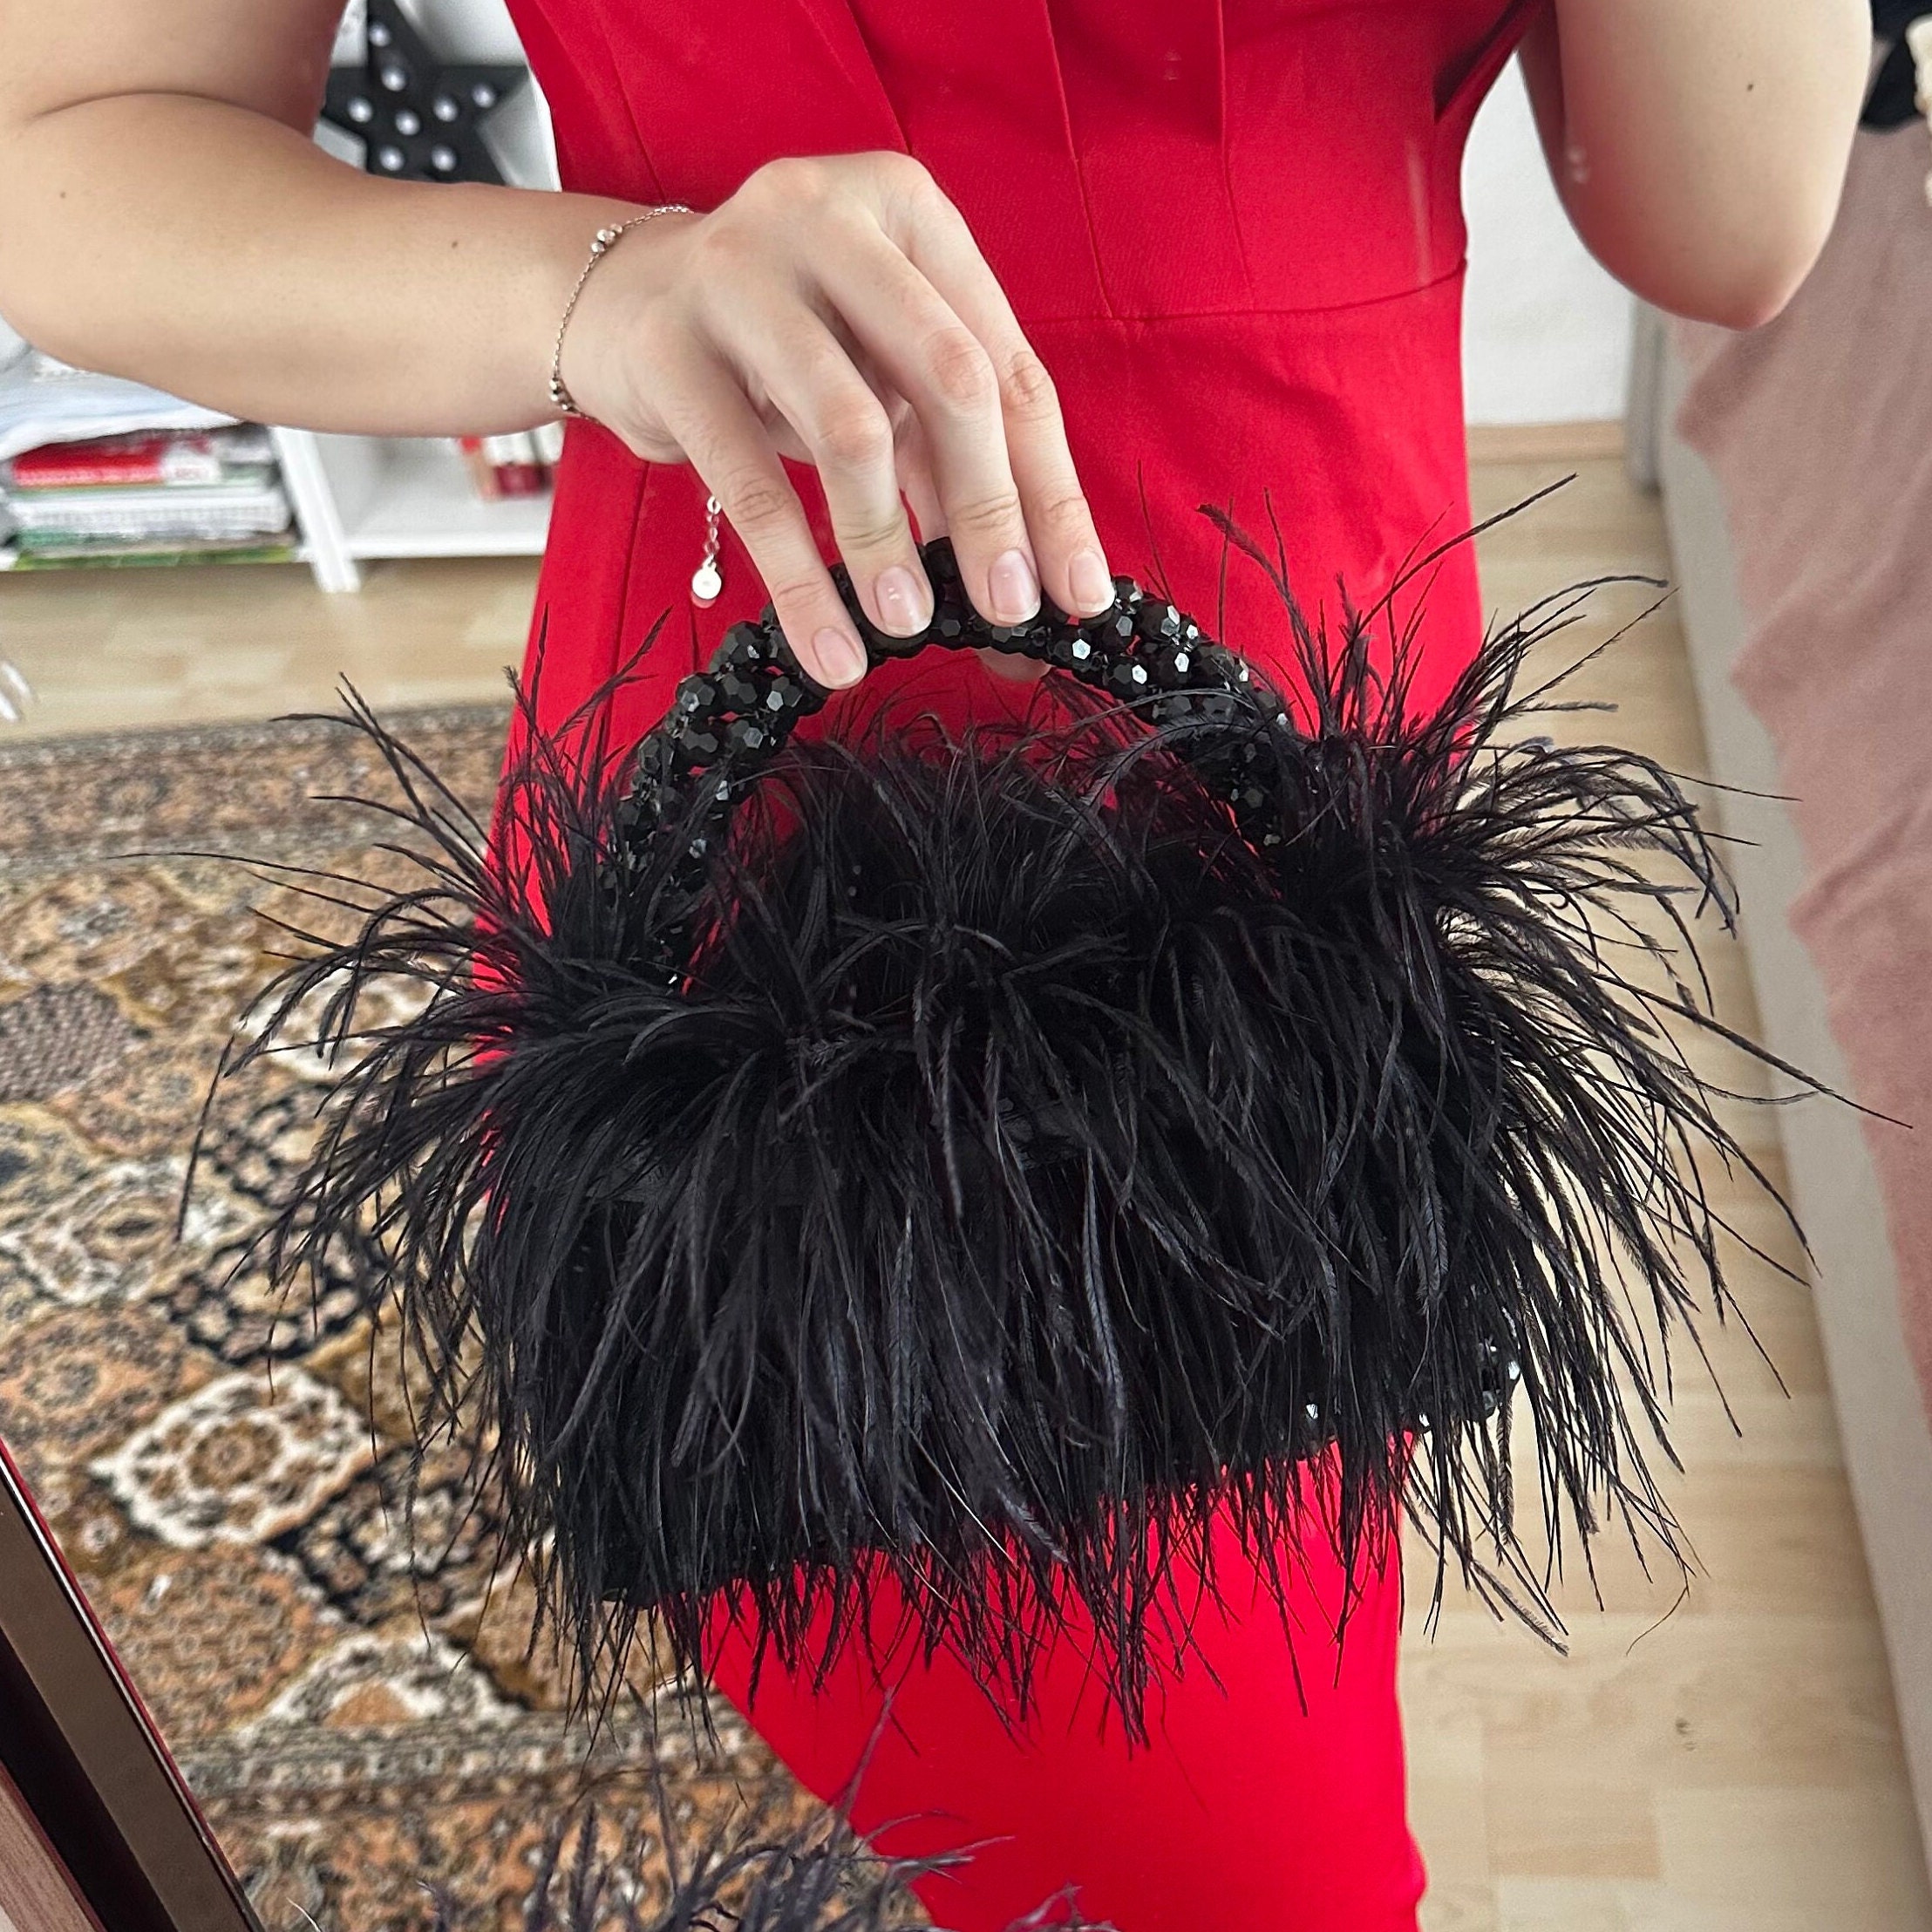 Small Black Feather Purse